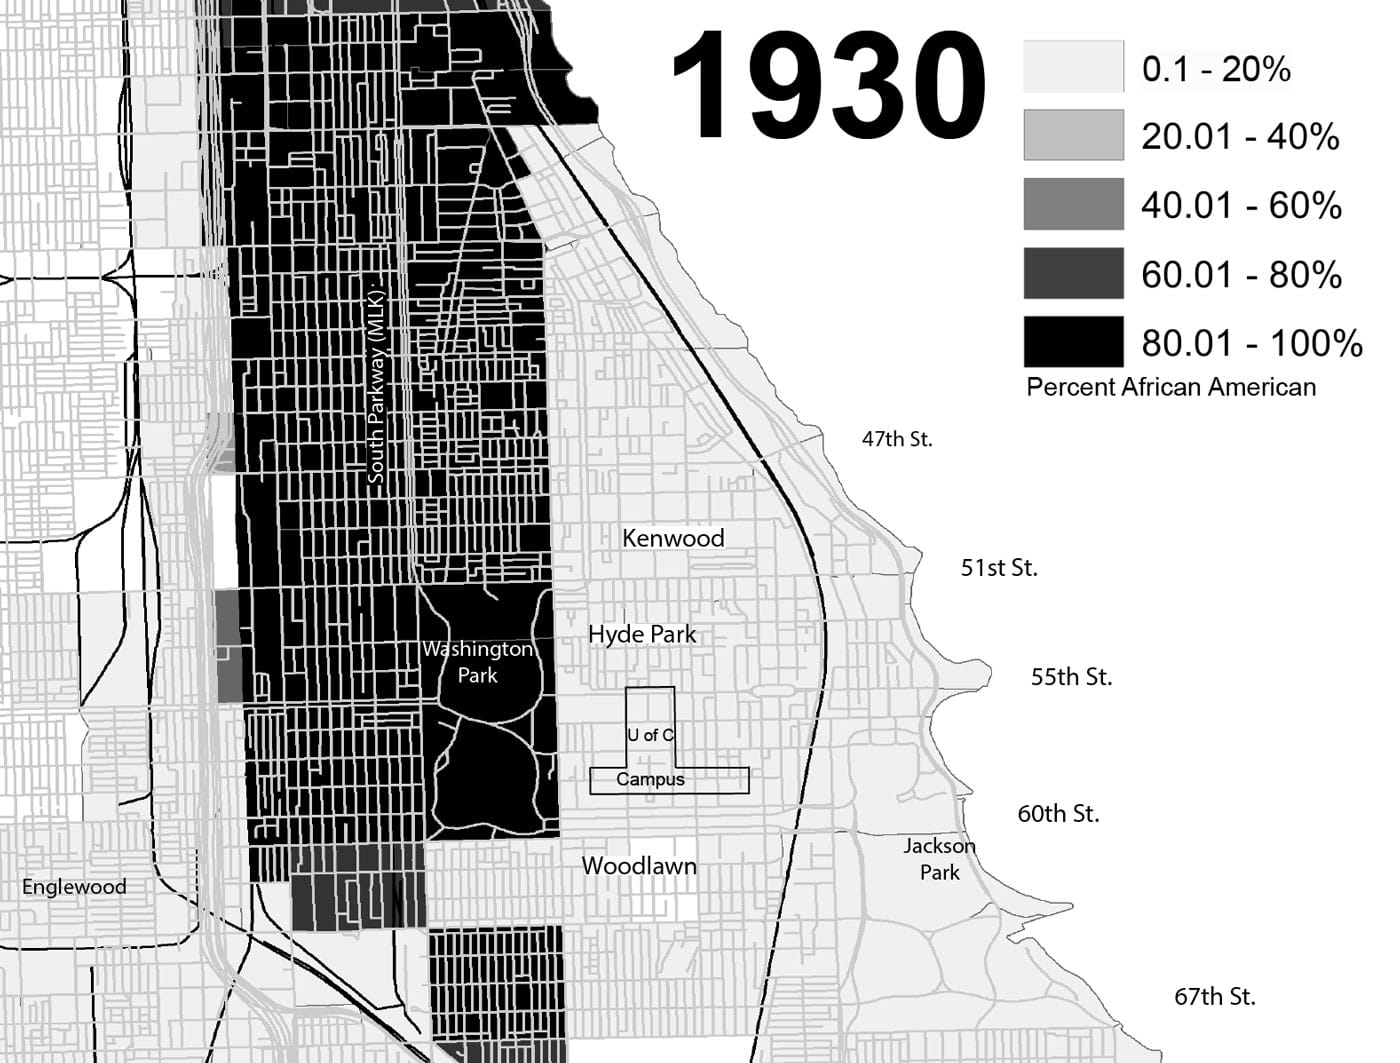 map showing Chicago in 1930 detailing population density by race